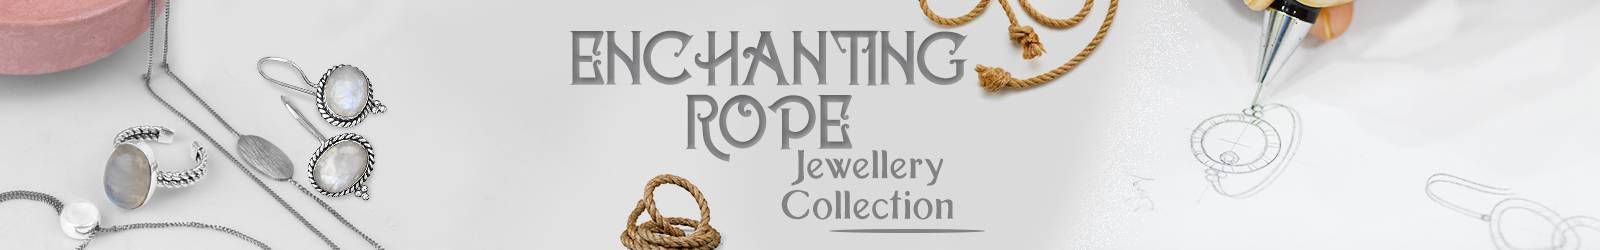 Handcrafted Twisted Silver Gemstone Jewelry Manufacturer in Jaipur